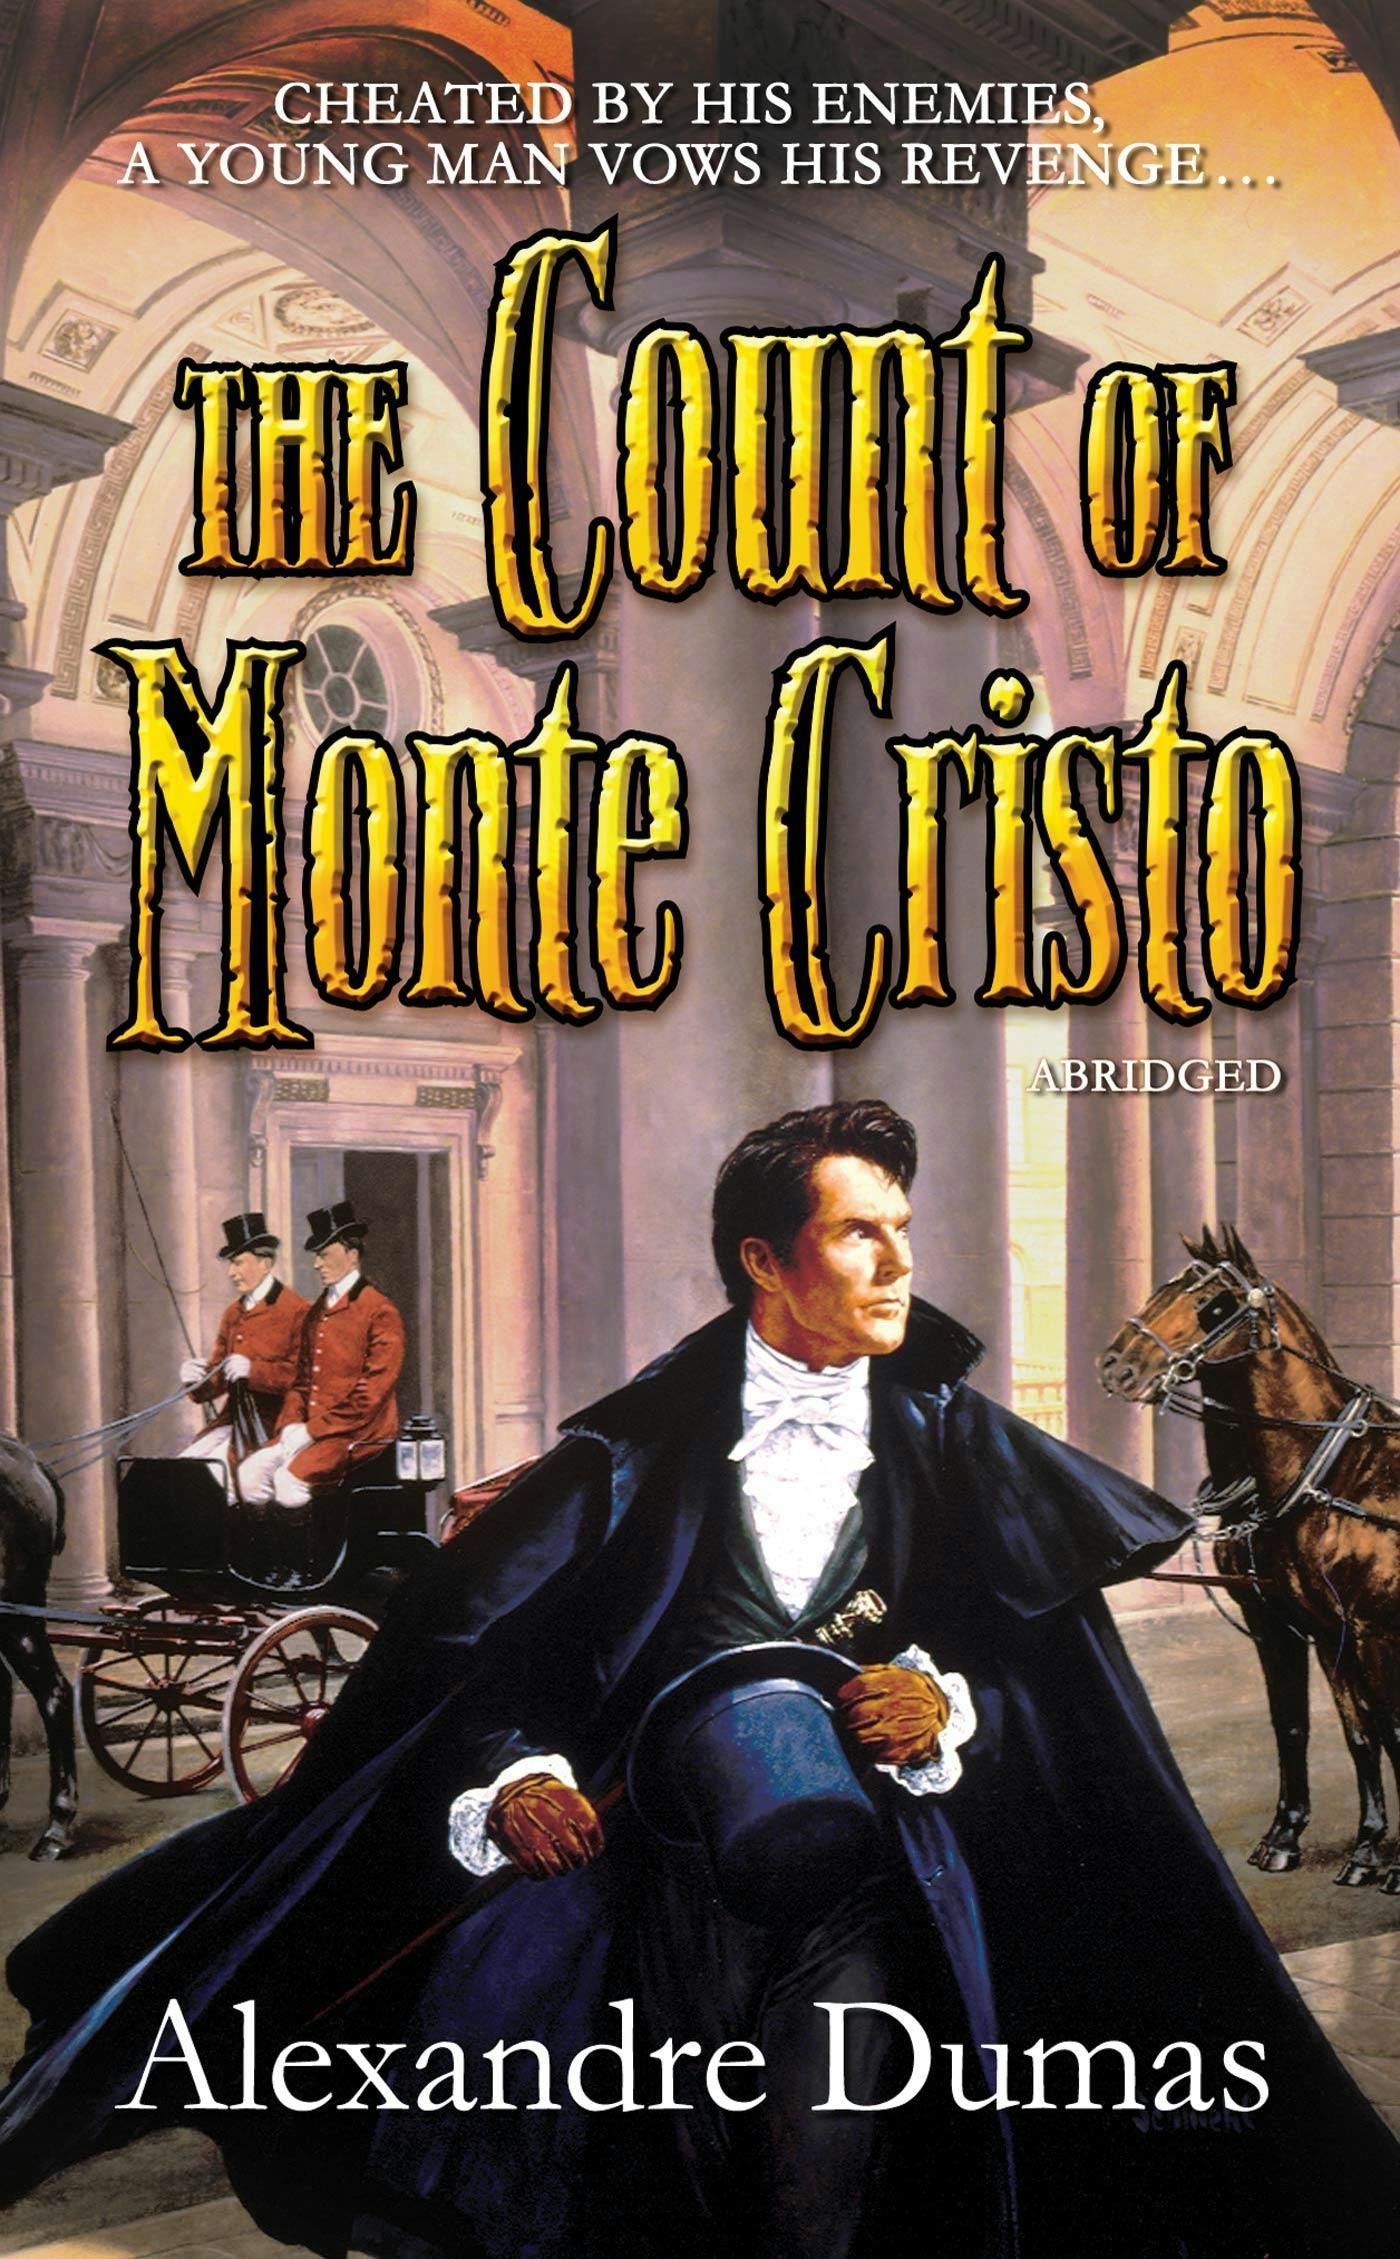 Image of The Count of Monte Cristo